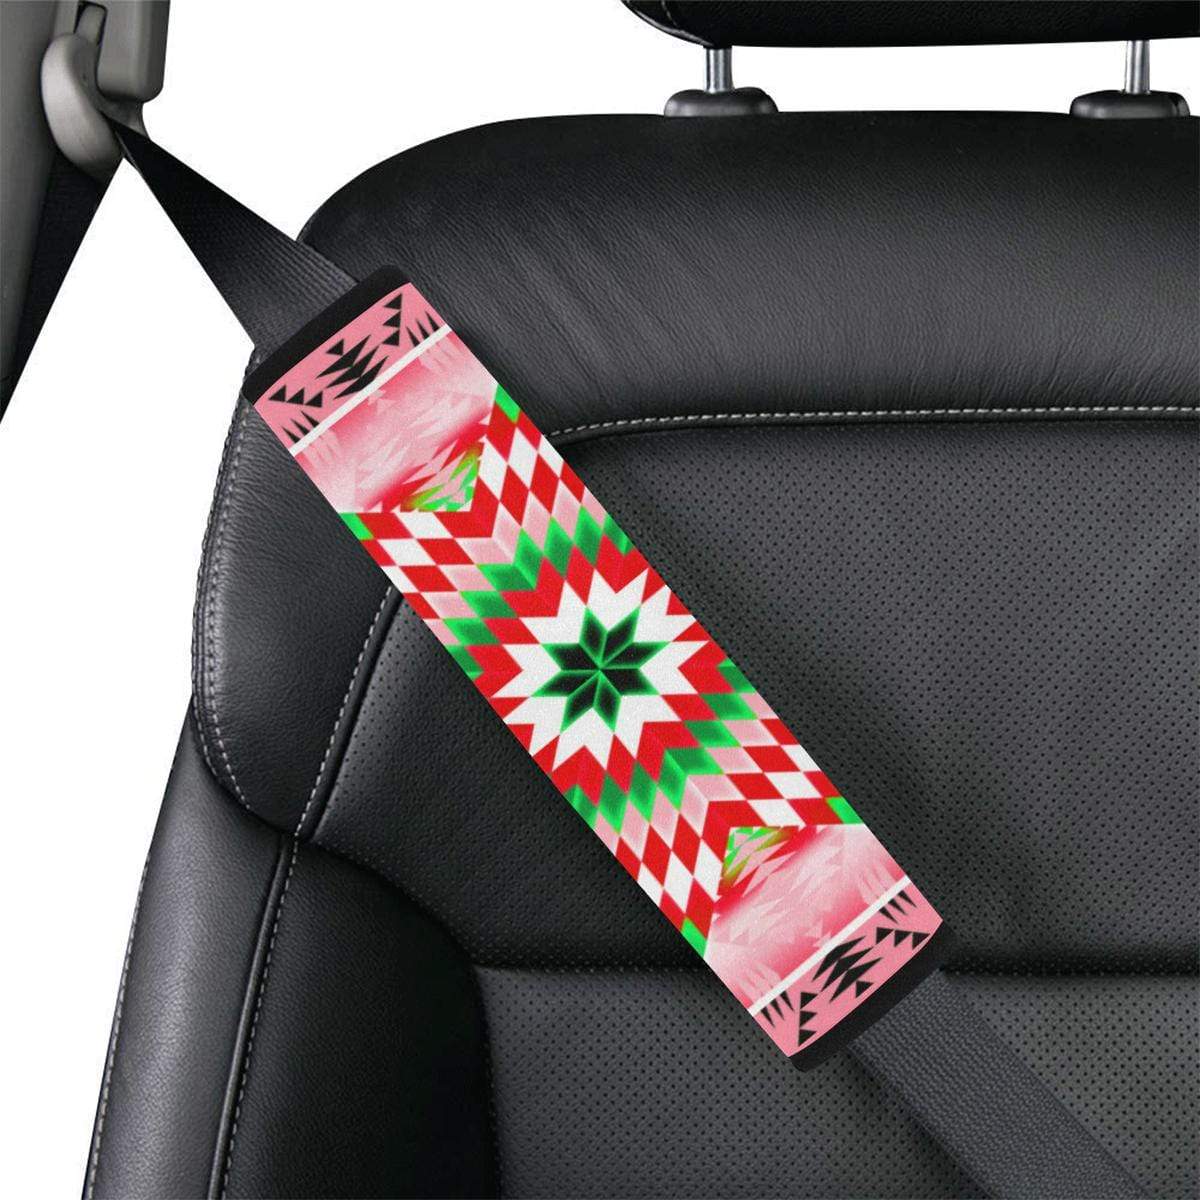 Tropical Forest Star Quilt Car Seat Belt Cover 7''x12.6'' Car Seat Belt Cover 7''x12.6'' e-joyer 